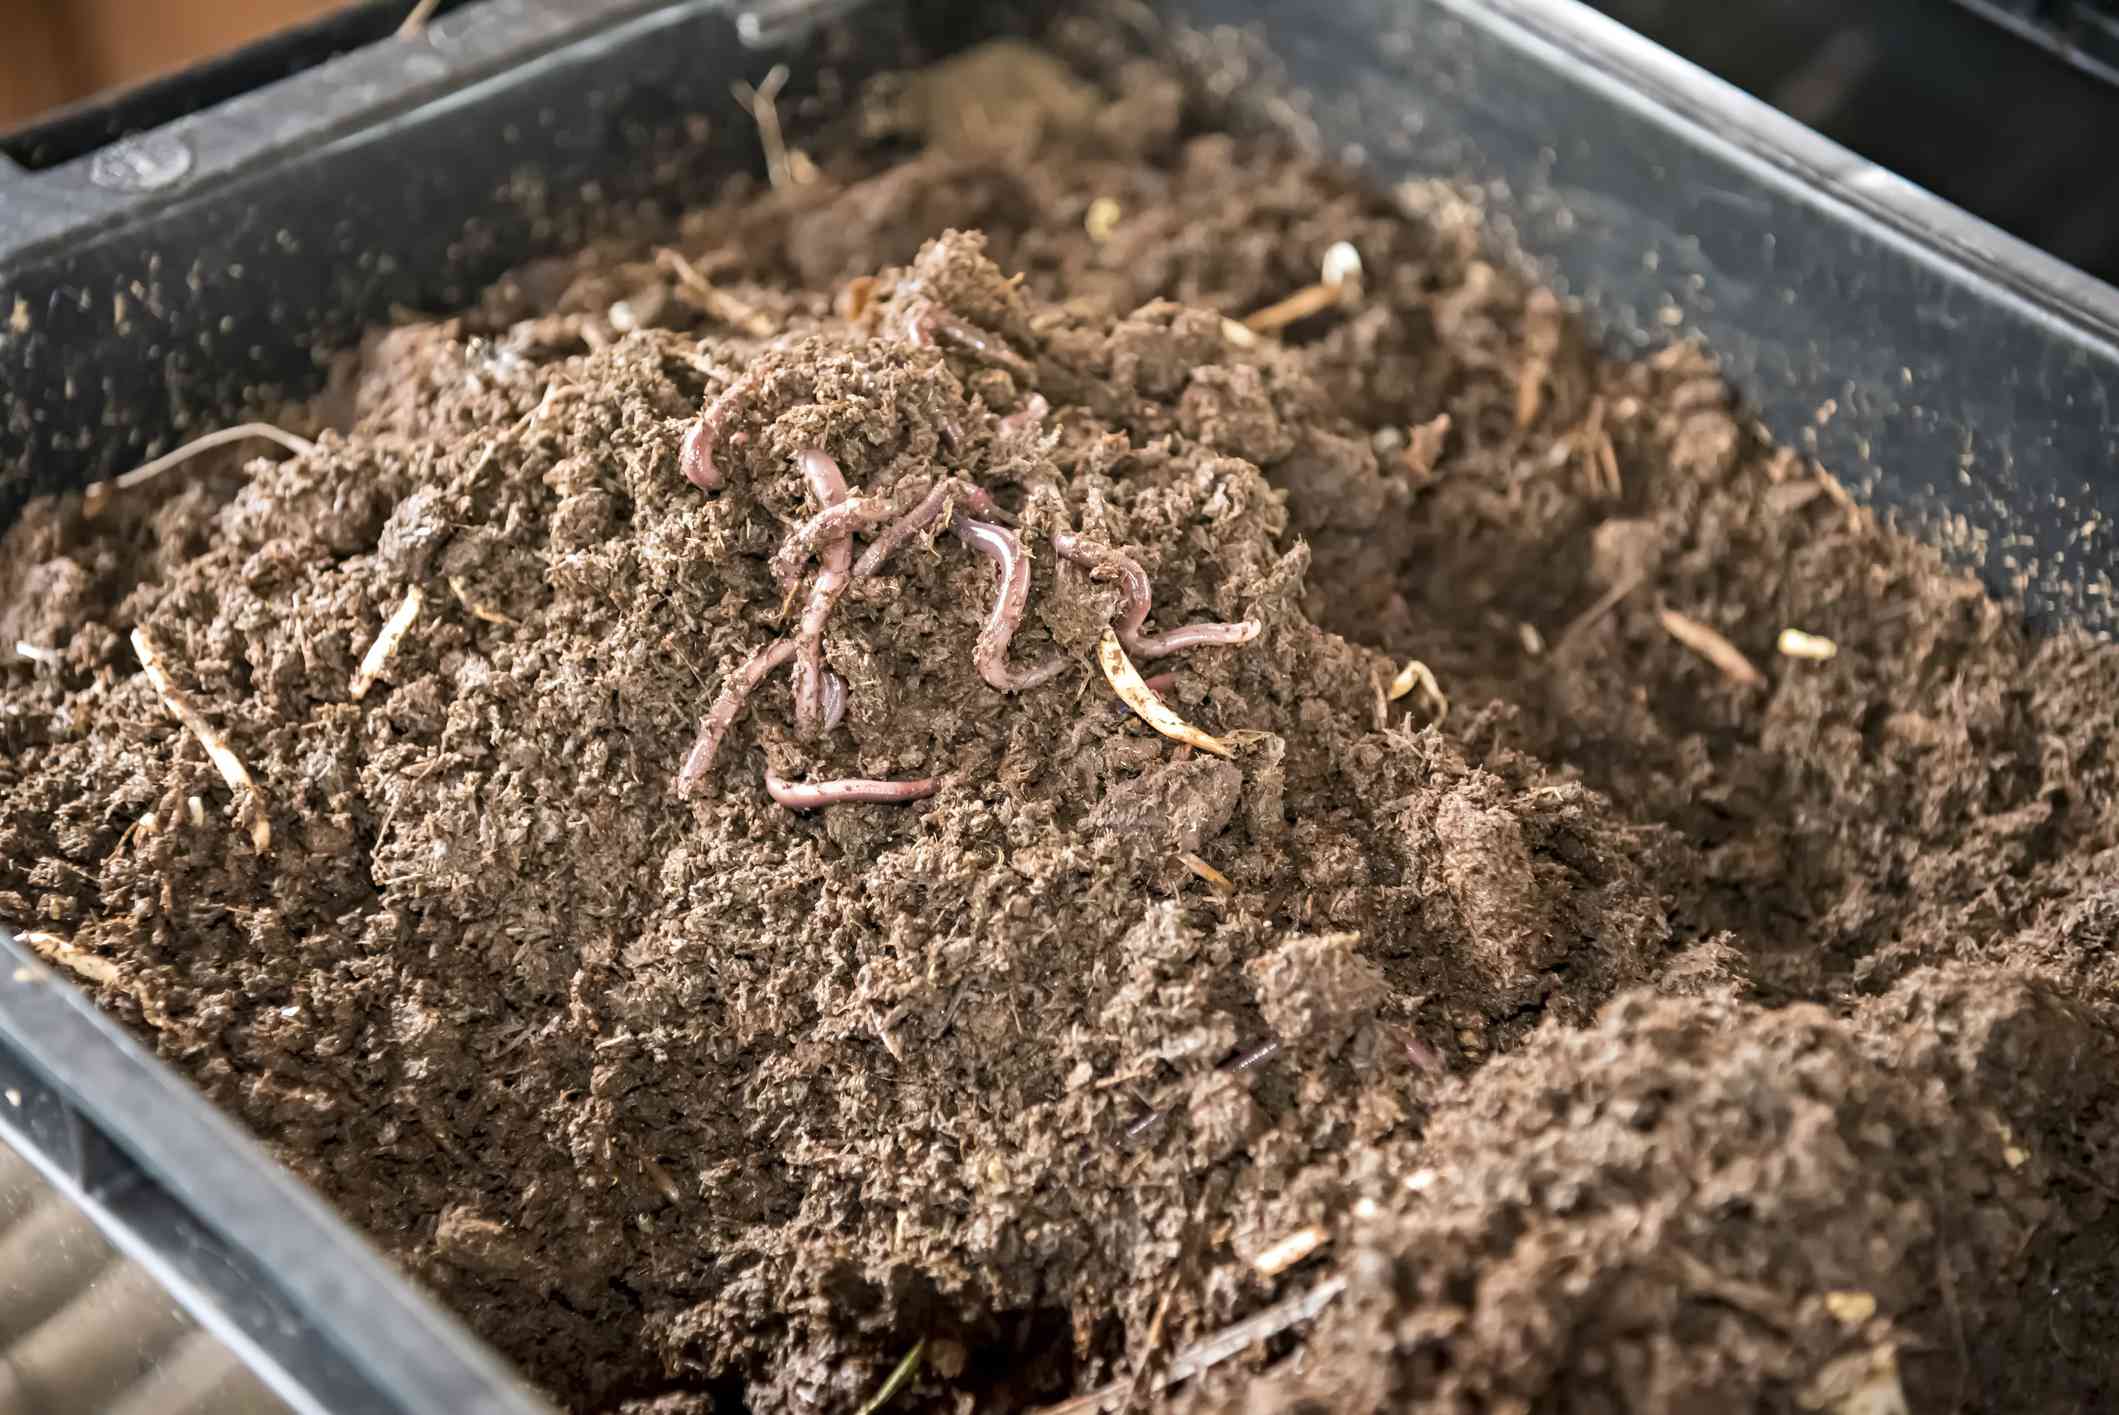 How Do Worms Help Compost